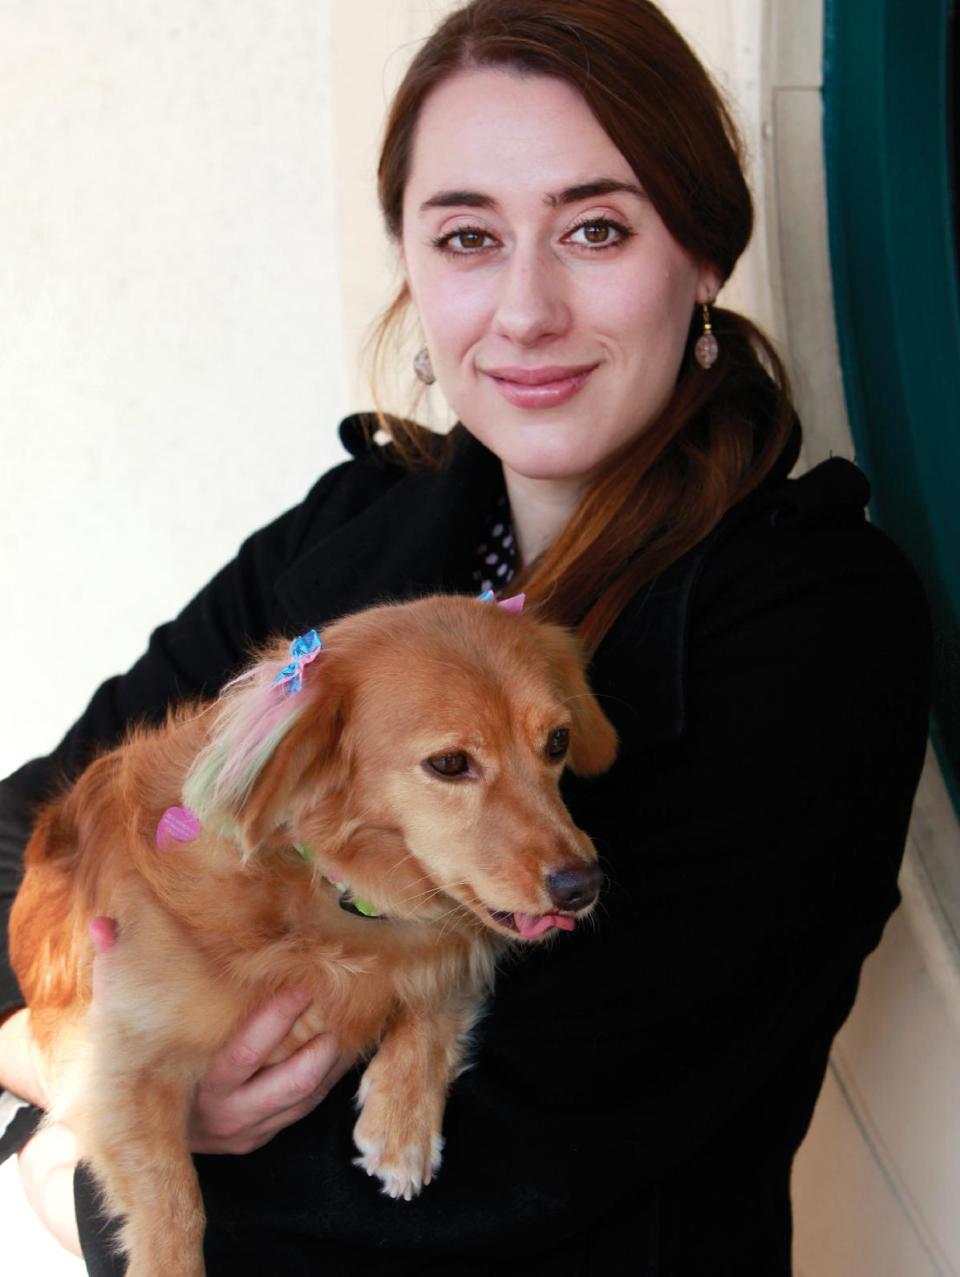 In this Friday, Dec. 13, 2013, photo, Sasha Sinnott holds her dog, a 2 year old dachshund mix, Sugarplum, after a chalking at the PetSmart in Culver City, Calif. Sugarplum went into the salon as a reddish-blonde dachshund mix and came out with pink and green ears, a rainbow tail and a bow in her fur. “It's like having a little unicorn creature," said attorney Sinnott of Pasadena, who was nearly giddy about her dog’s redesign. (AP Photo/Richard Vogel)